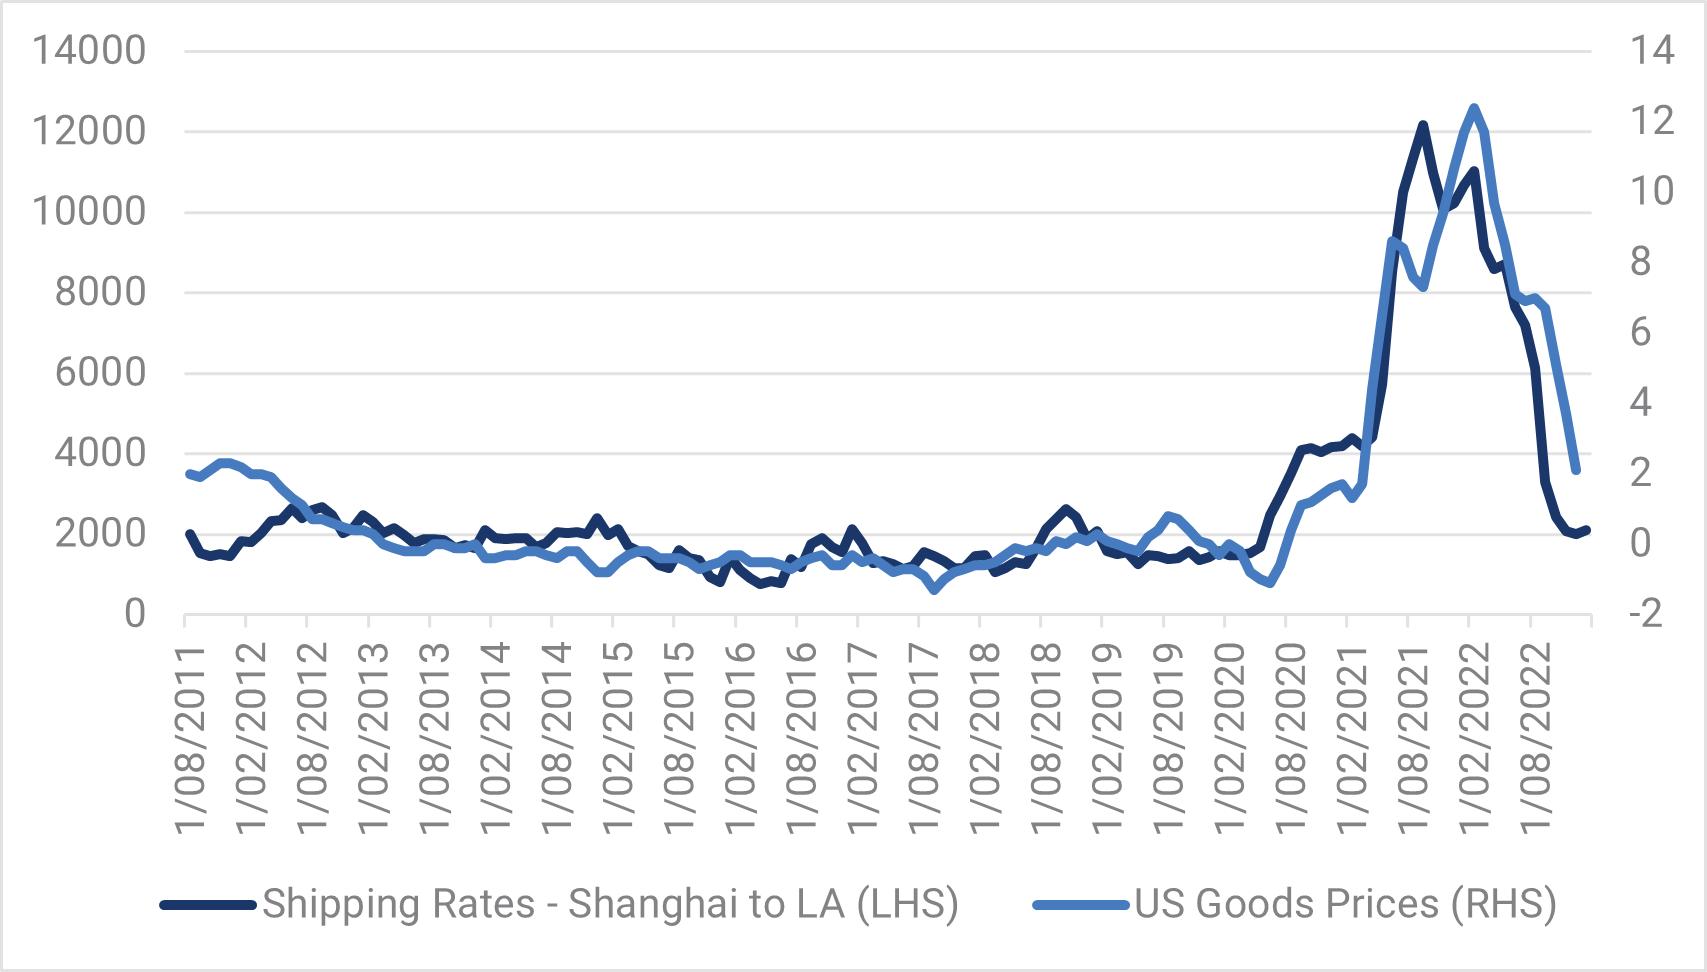 Chart 1: Goods prices and shipping rates 
Source: YarraCM, Bloomberg